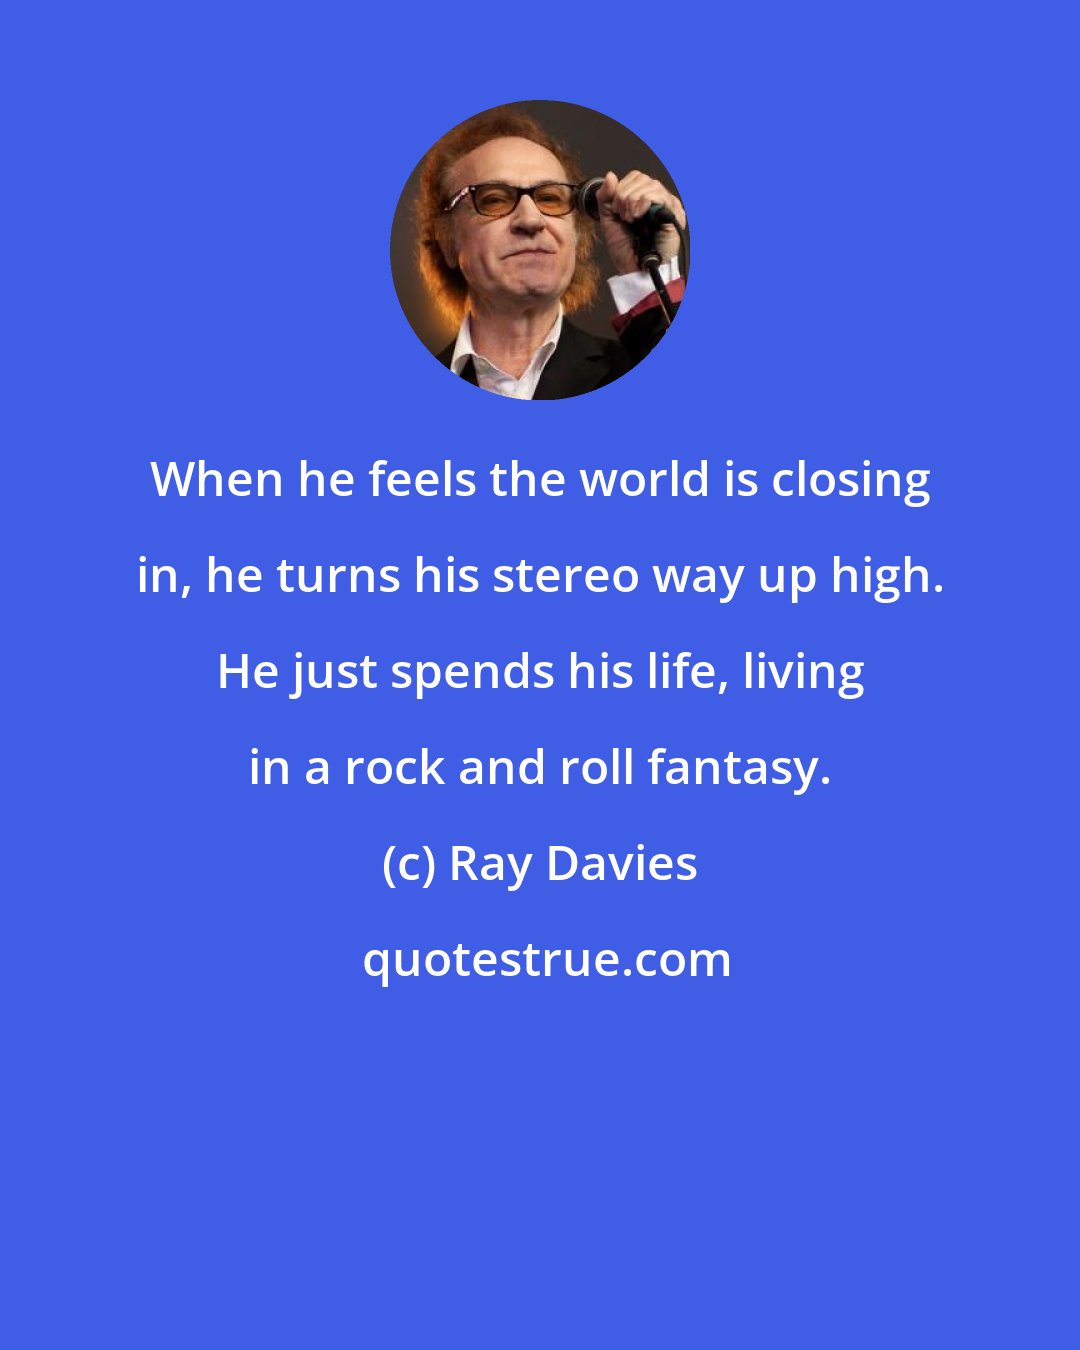 Ray Davies: When he feels the world is closing in, he turns his stereo way up high. He just spends his life, living in a rock and roll fantasy.